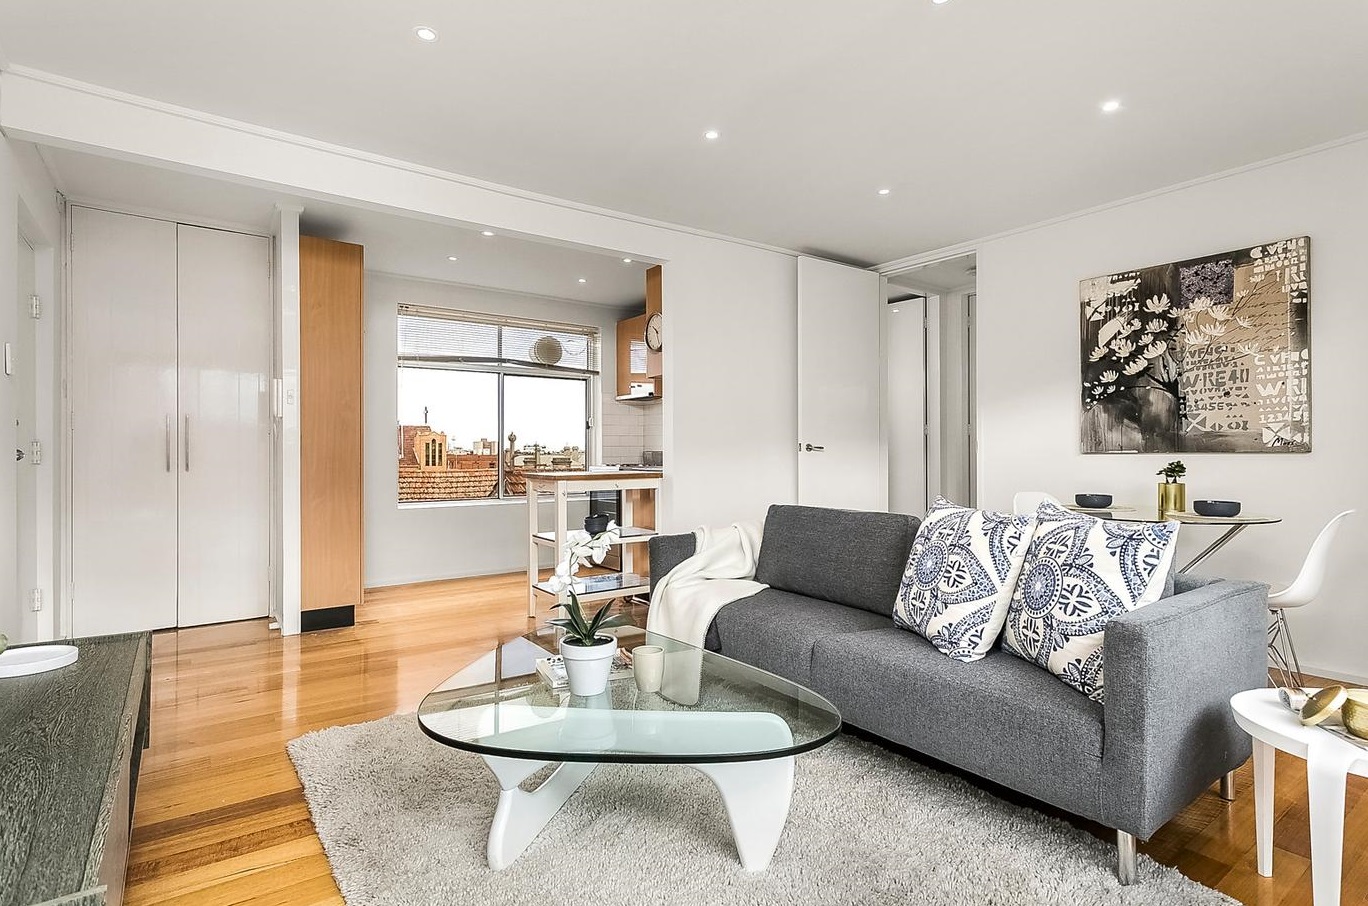 NPB Advocate, Rob Di Vita secured this renovated two bedroom apartment in the heart of Brunswick for $458,000